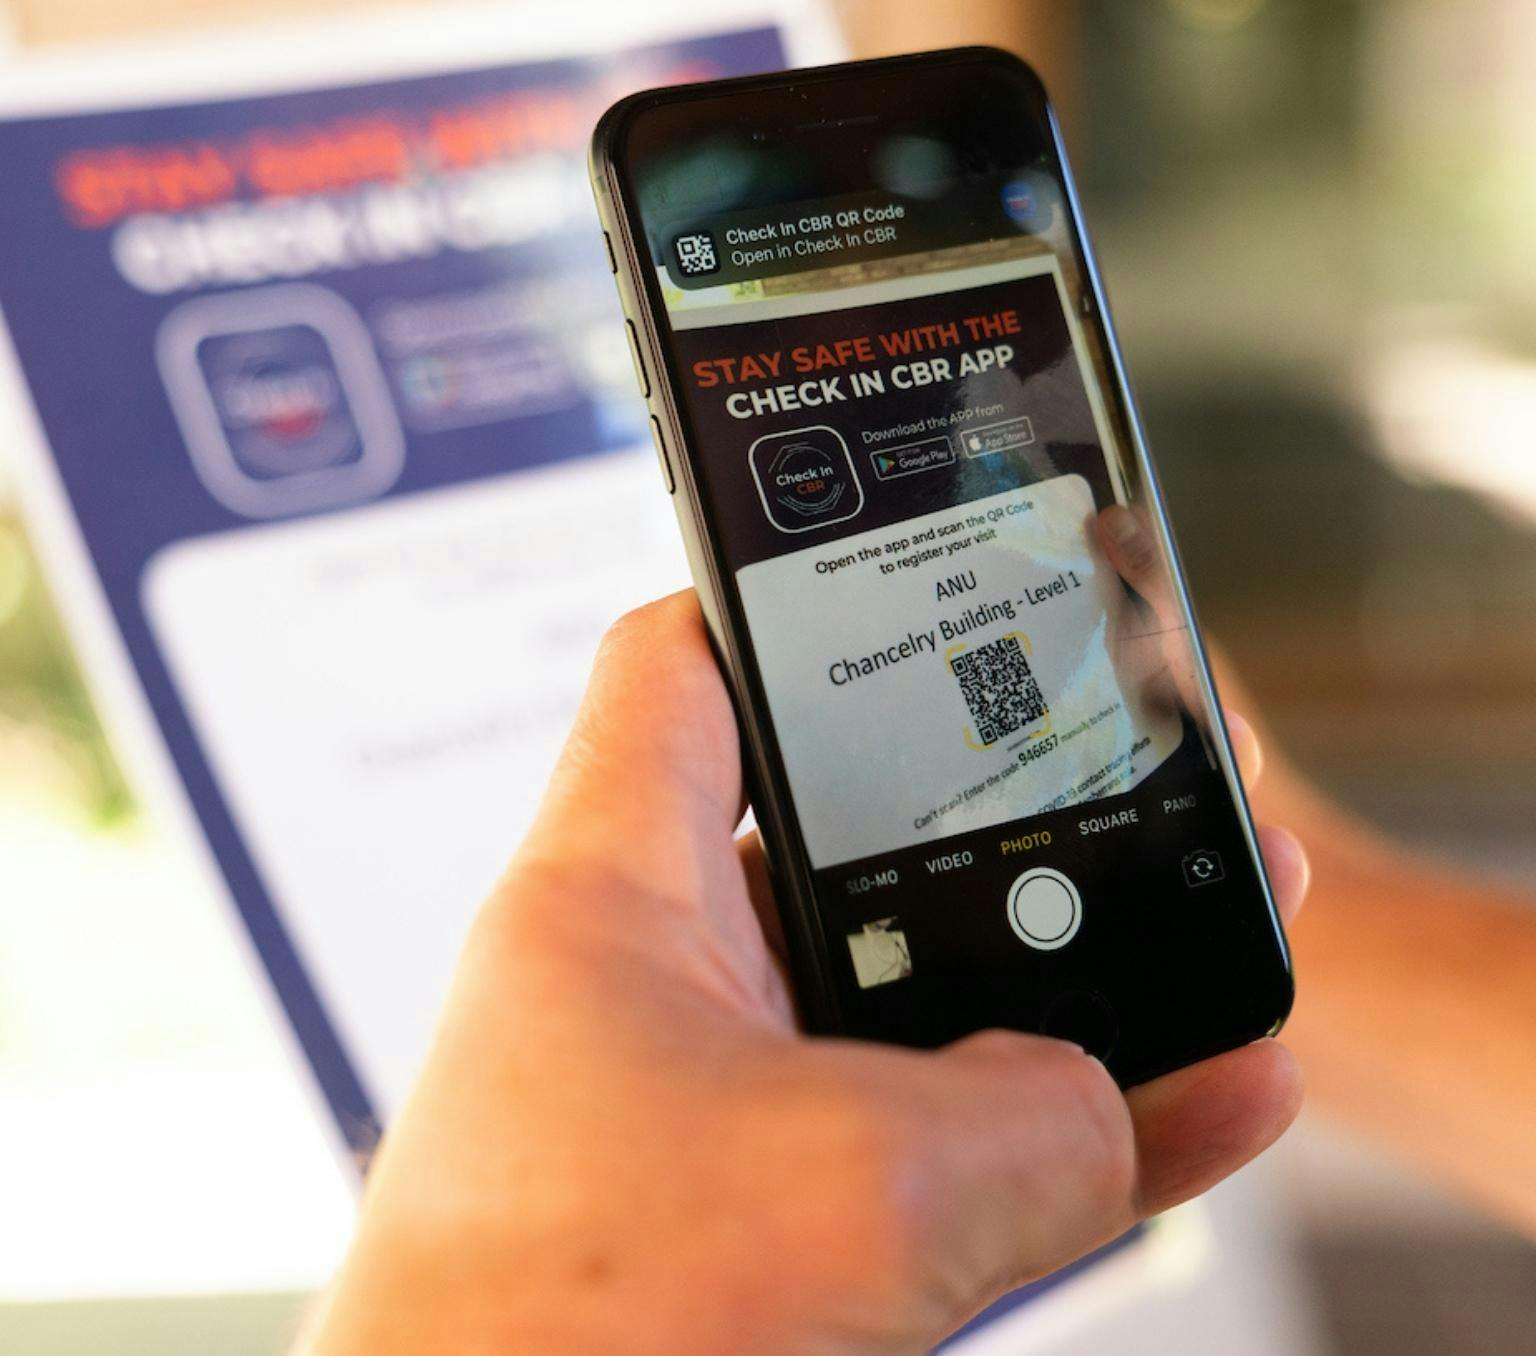 close up photo of a person's hand holding a phone infront of Canberra COVID-19 checkin posters. The phone displays the Canberra check-in app.